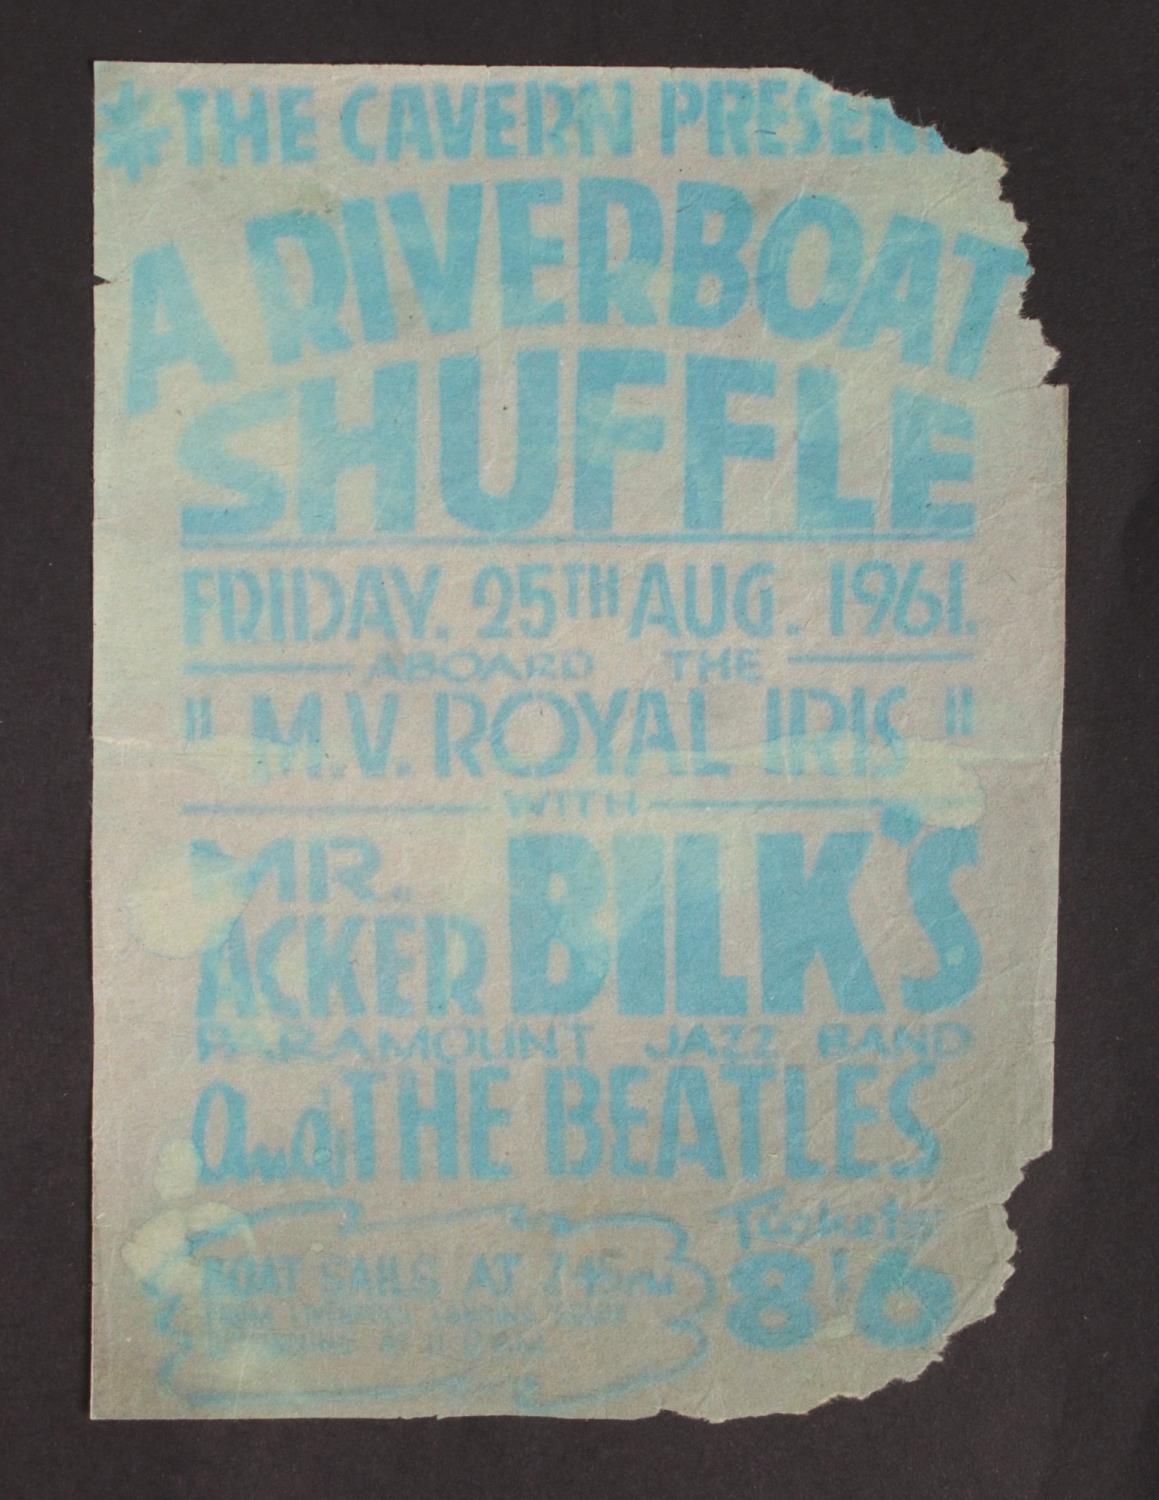 The Beatles interest; An original flyer for The Cavern presents A Riverboat Shuffle, 1961, aboard